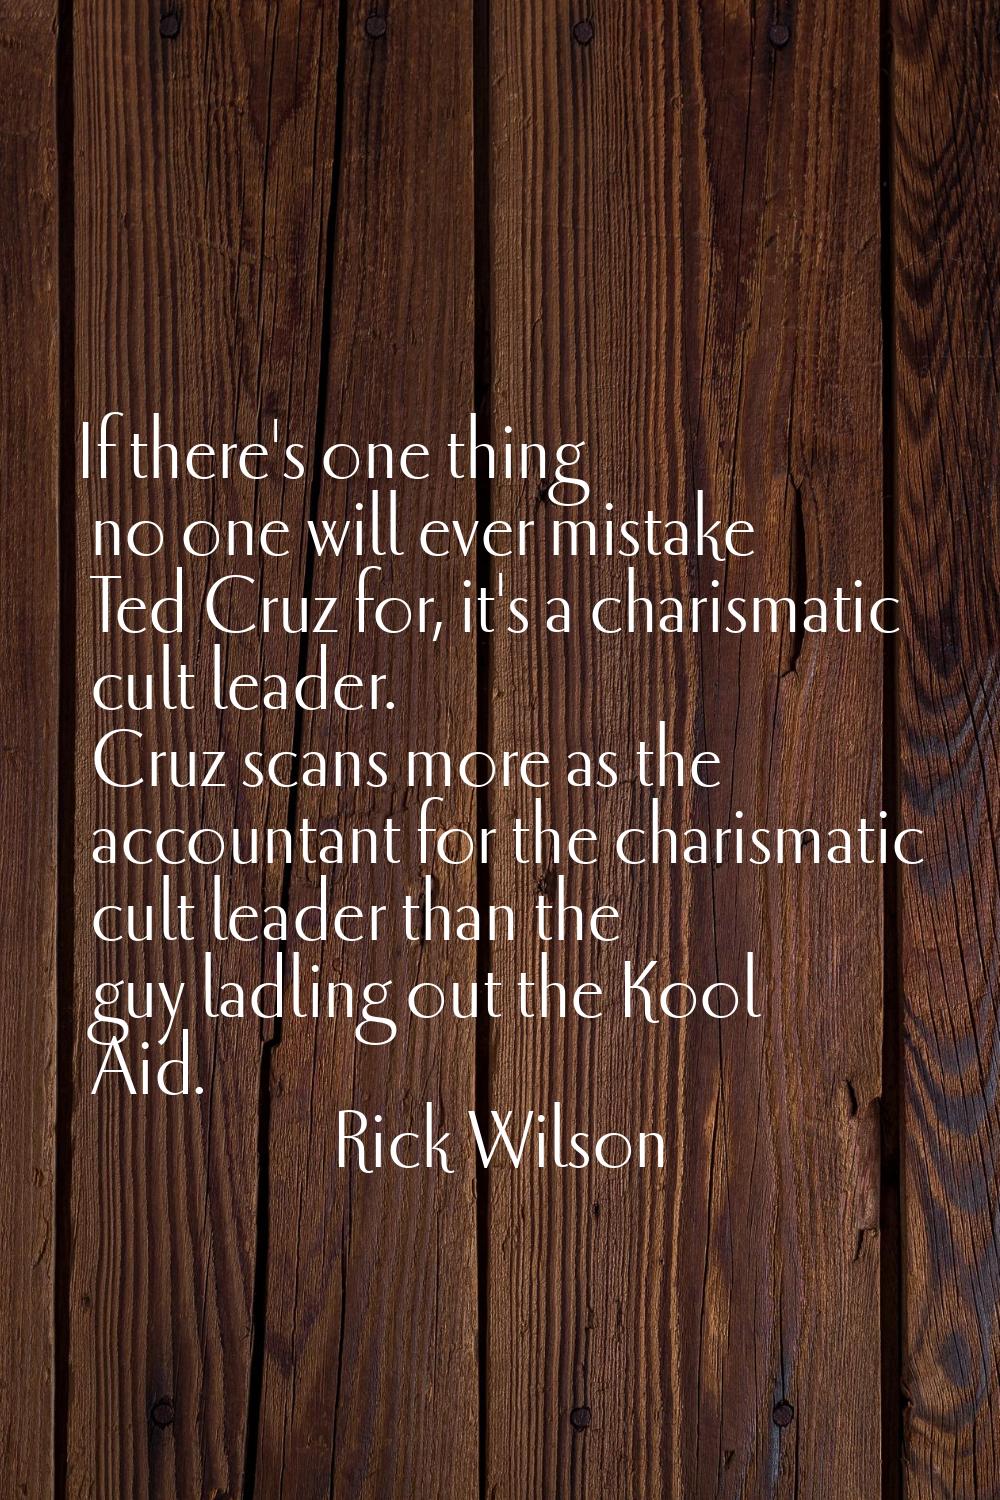 If there's one thing no one will ever mistake Ted Cruz for, it's a charismatic cult leader. Cruz sc